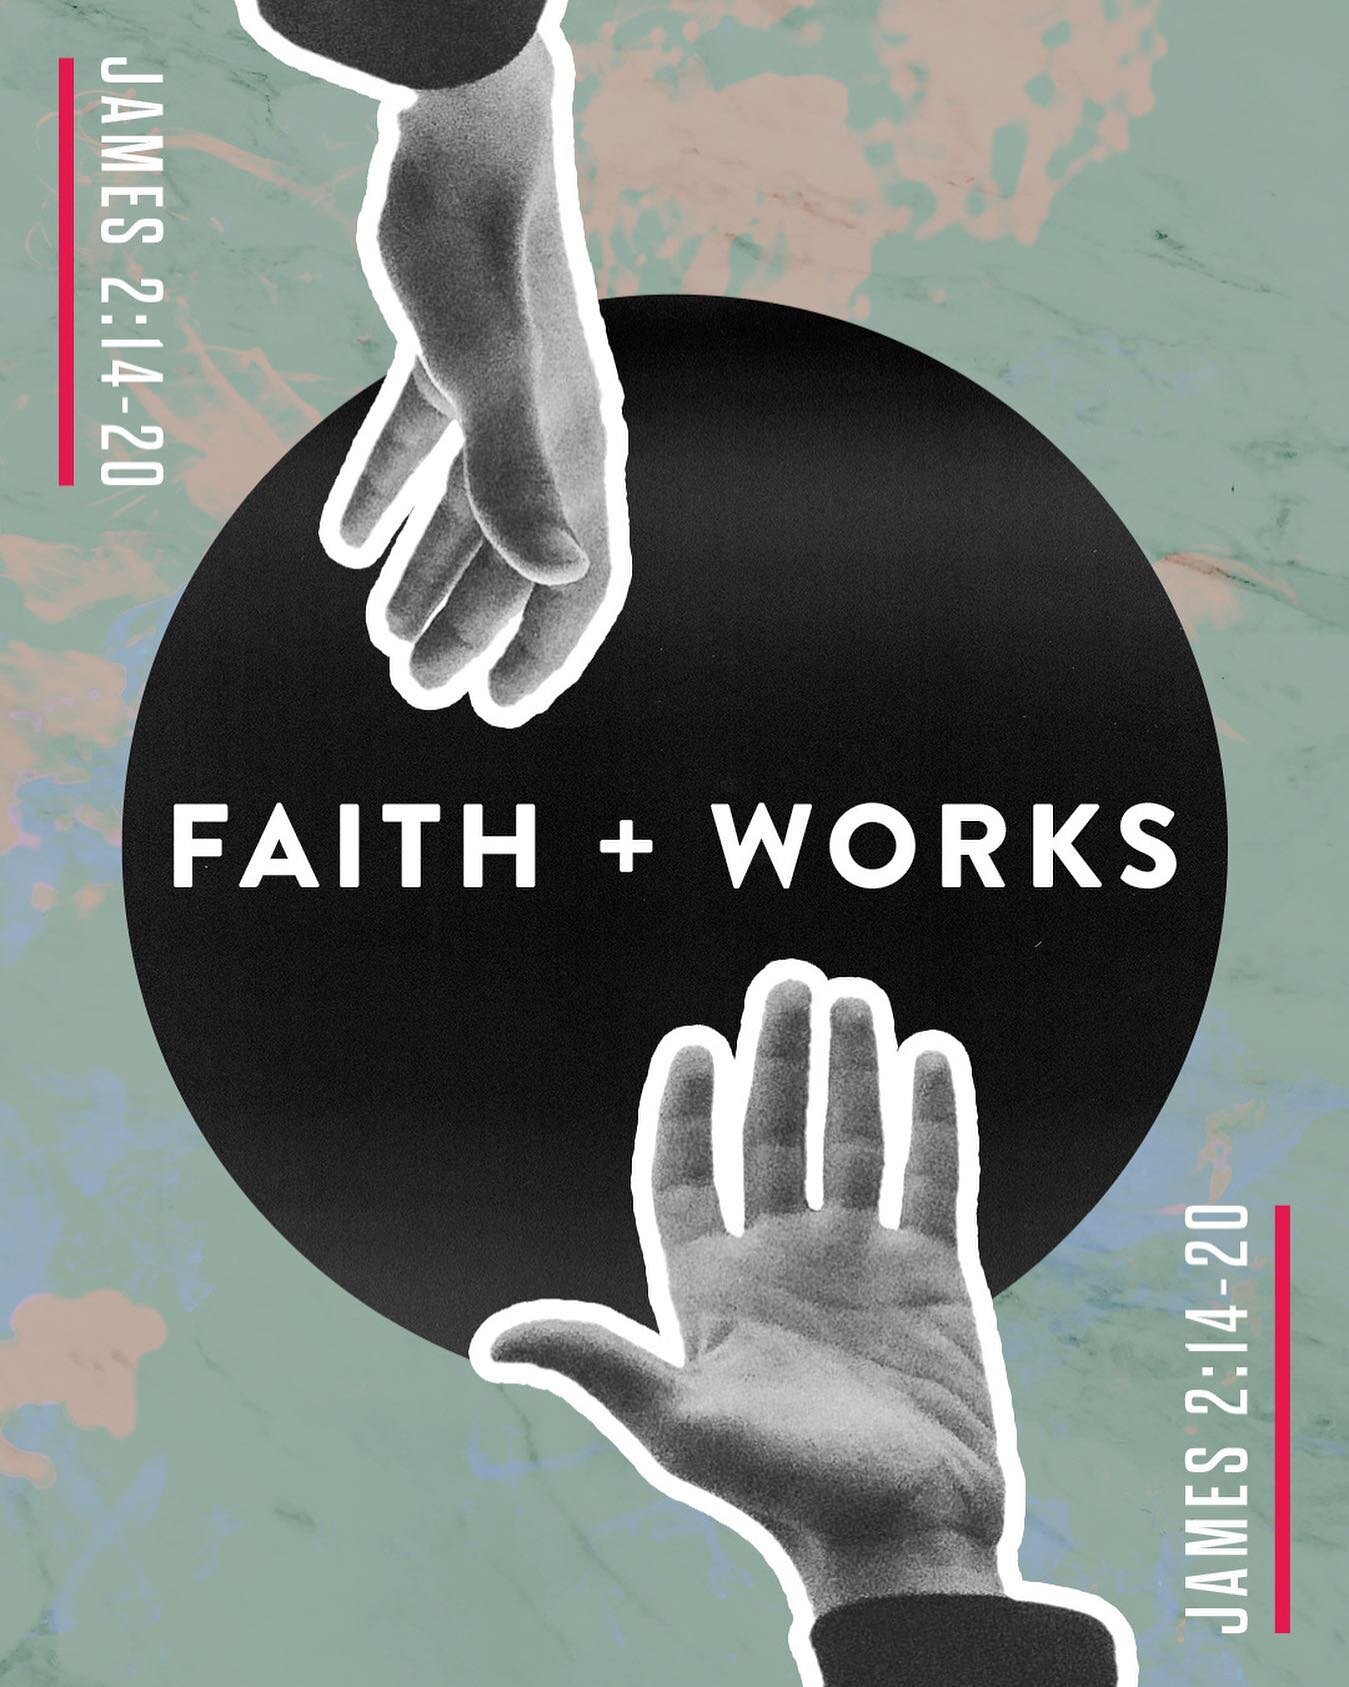 Faith + Works. They go hand in hand. 
⠀⠀⠀⠀⠀⠀⠀⠀⠀
I made this months ago (pre-COVID) for my church, but I&rsquo;m just now getting to share it here. 🤪 
⠀⠀⠀⠀⠀⠀⠀⠀⠀
⠀⠀⠀⠀⠀⠀⠀⠀⠀
⠀⠀⠀⠀⠀⠀⠀⠀⠀
⠀⠀⠀⠀⠀⠀⠀⠀⠀
#missyrobbsgdp #freelancegraphicdesigner #freelancegraphicd